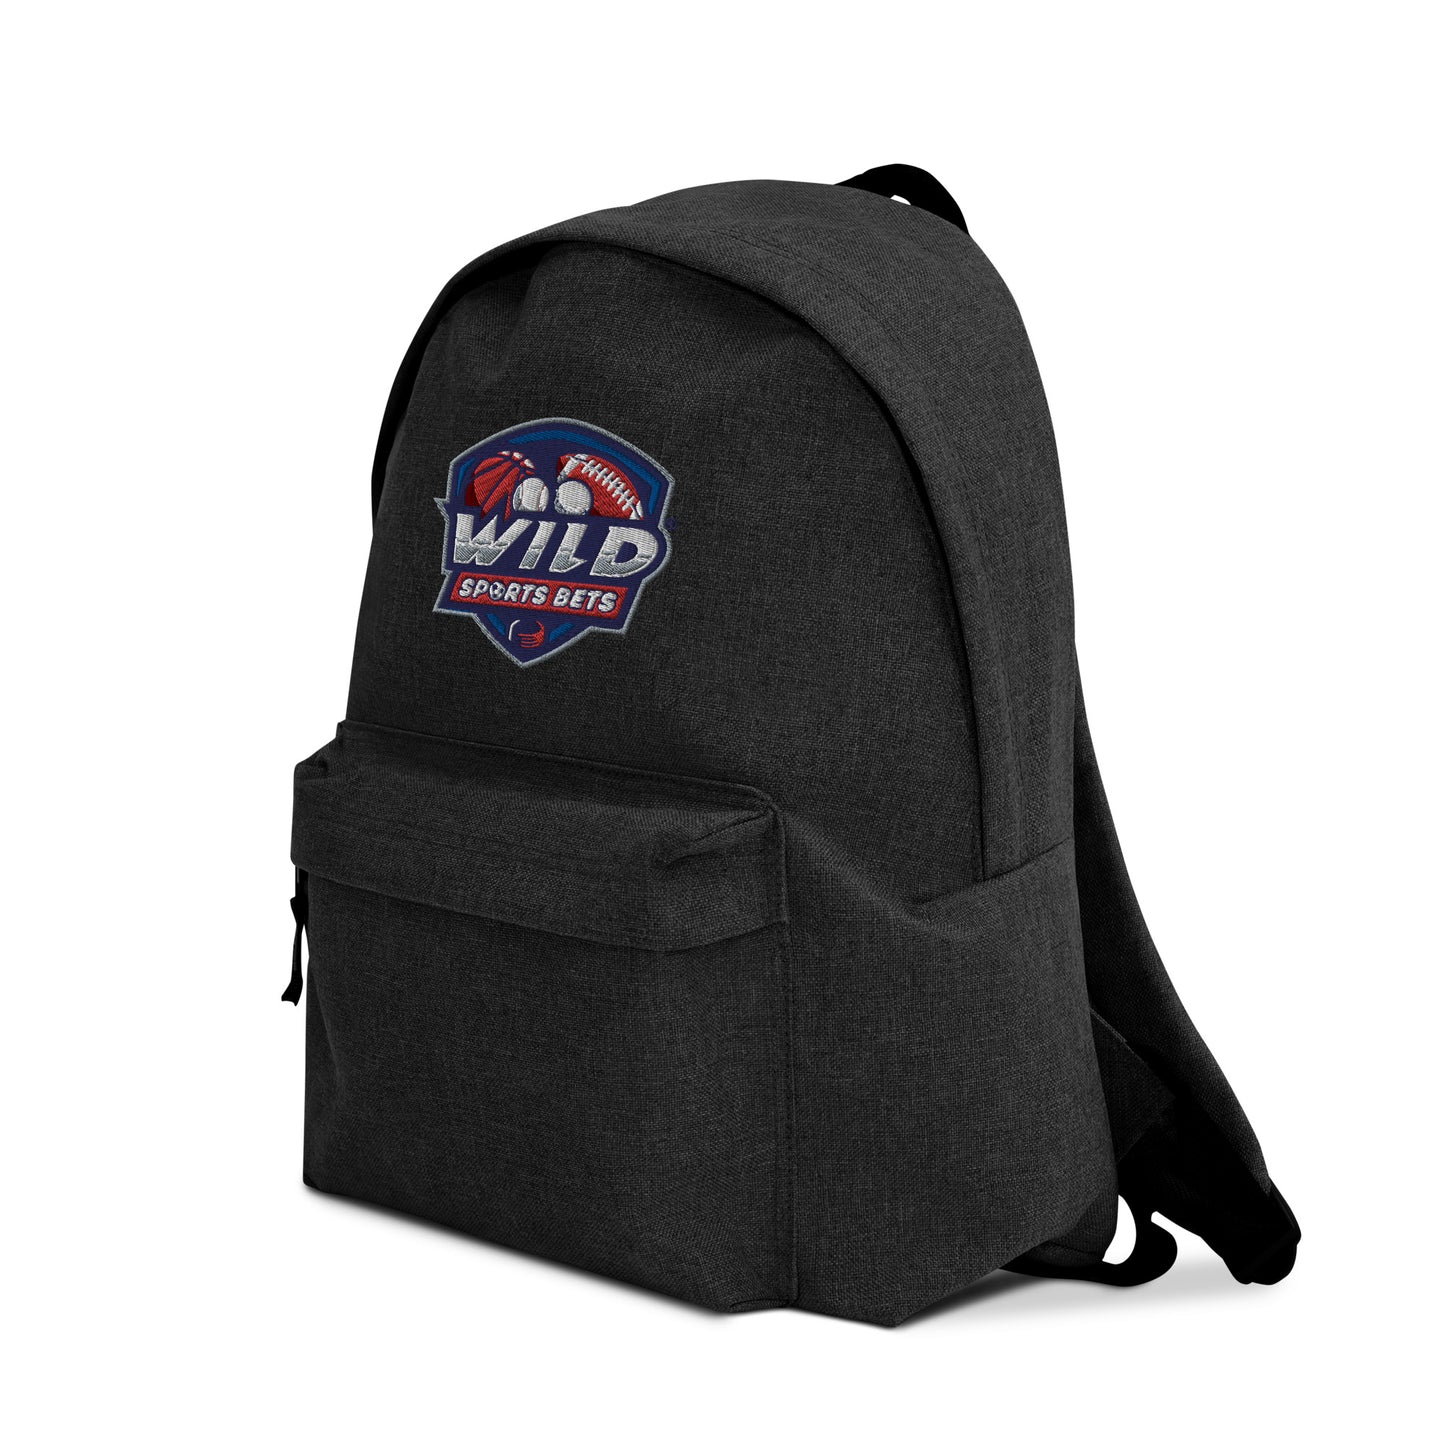 WSB Embroidered Backpack